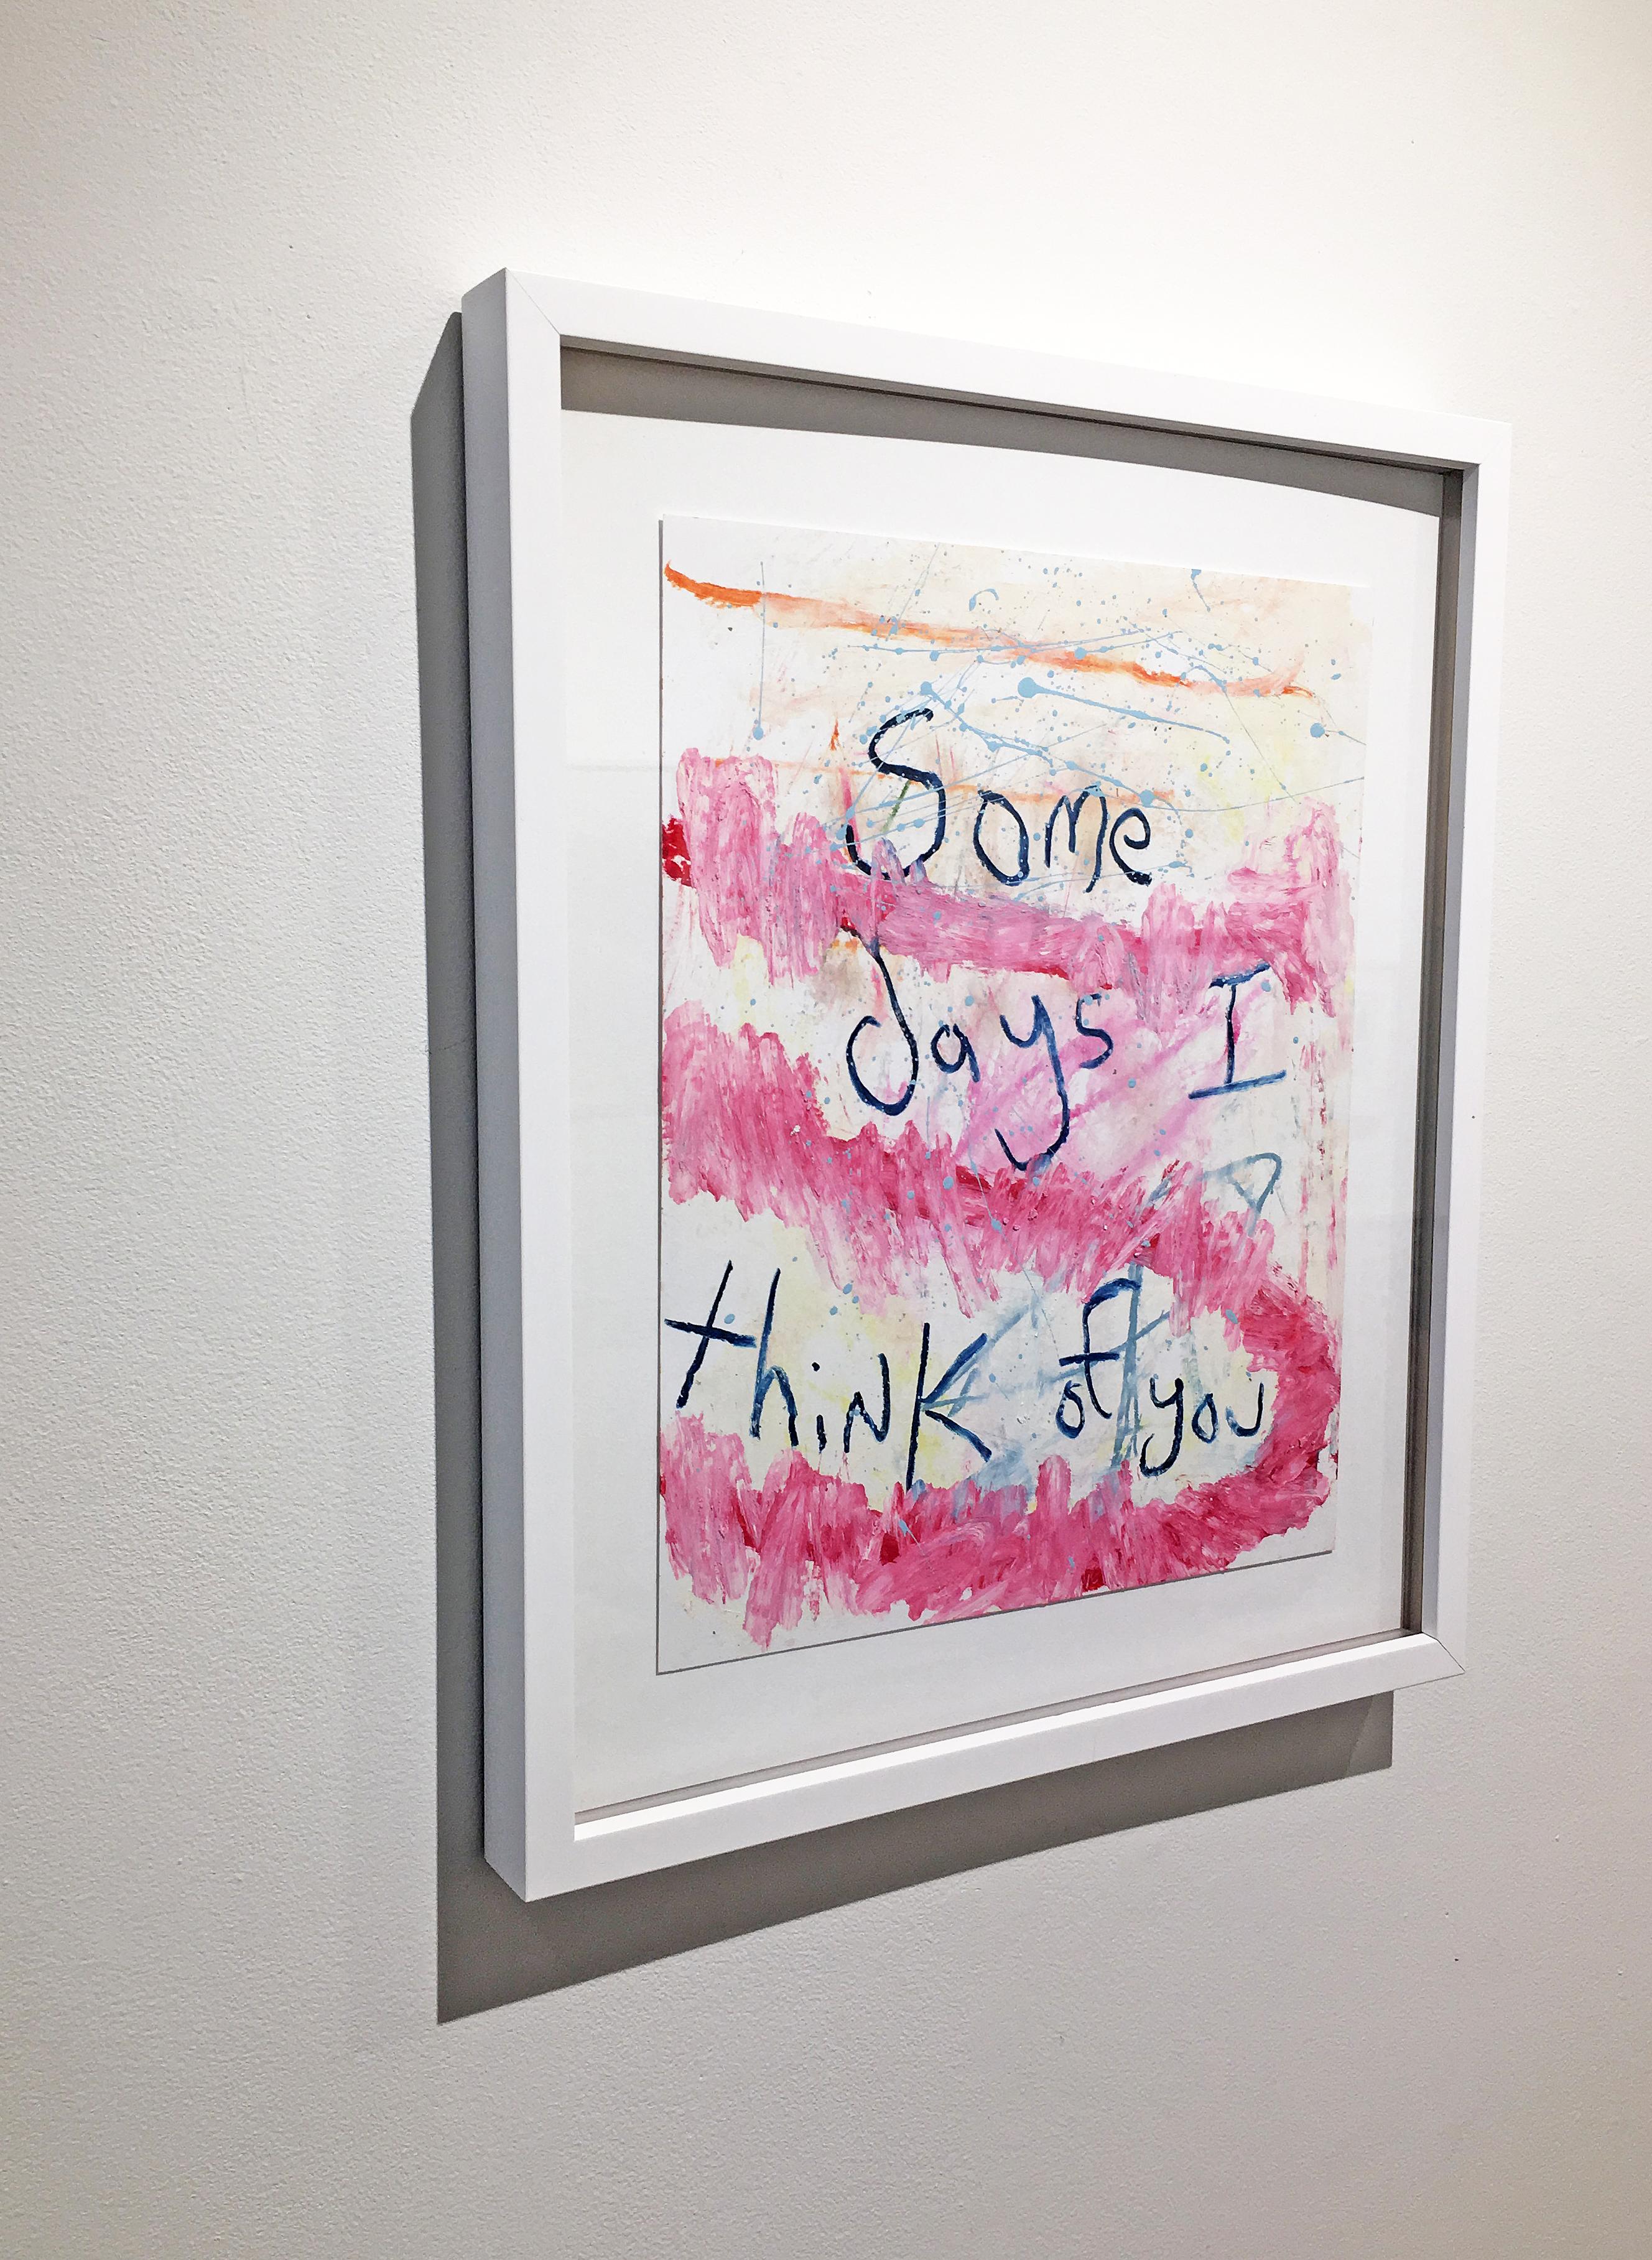 'Some Days I Think of You' by Adam Handler, 2019. Oil stick, acrylic, and pencil on paper, 14 x 11 in. / Frame: 18 x 15 in. This work on paper by American painter Adam Handler depicts the text 'Some Days I Think of You' in his signature faux-naif,